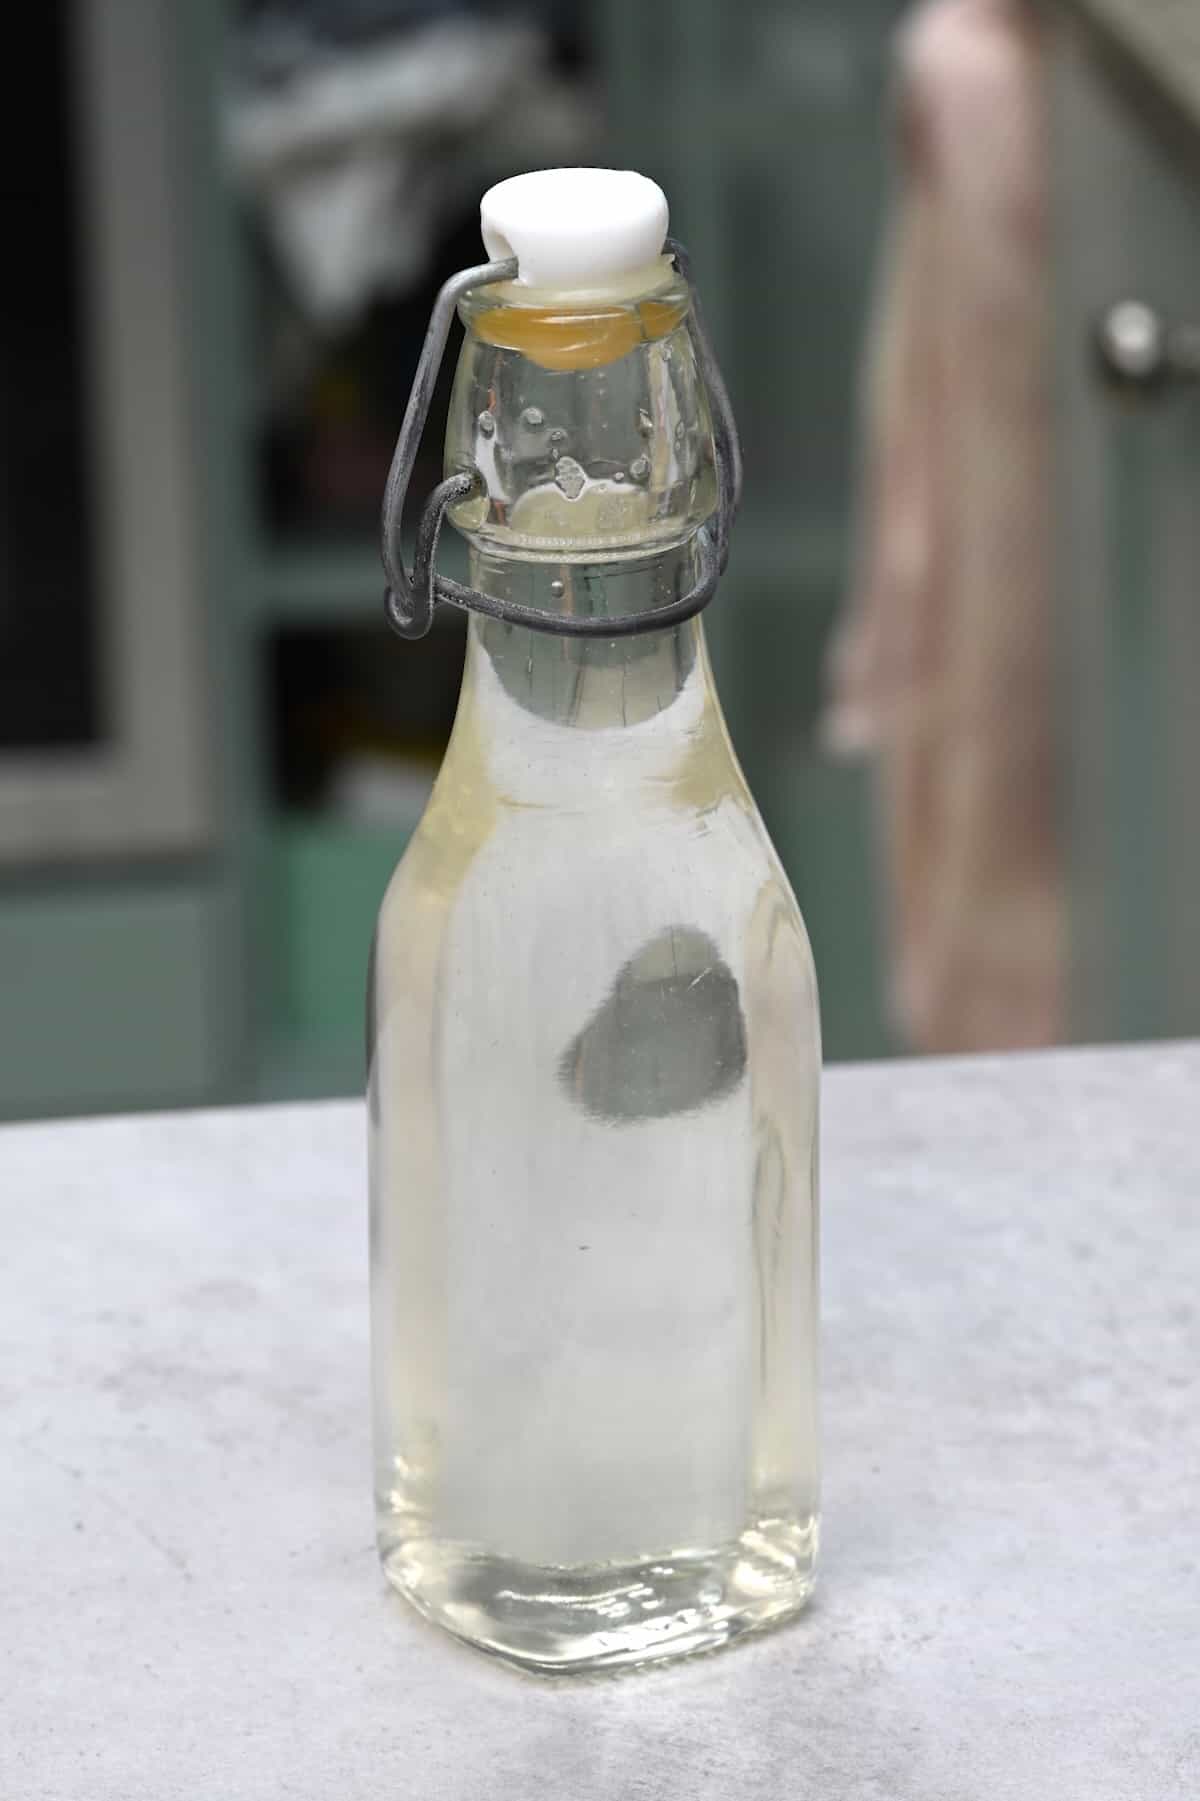 A small bottle with homemade sugar syrup